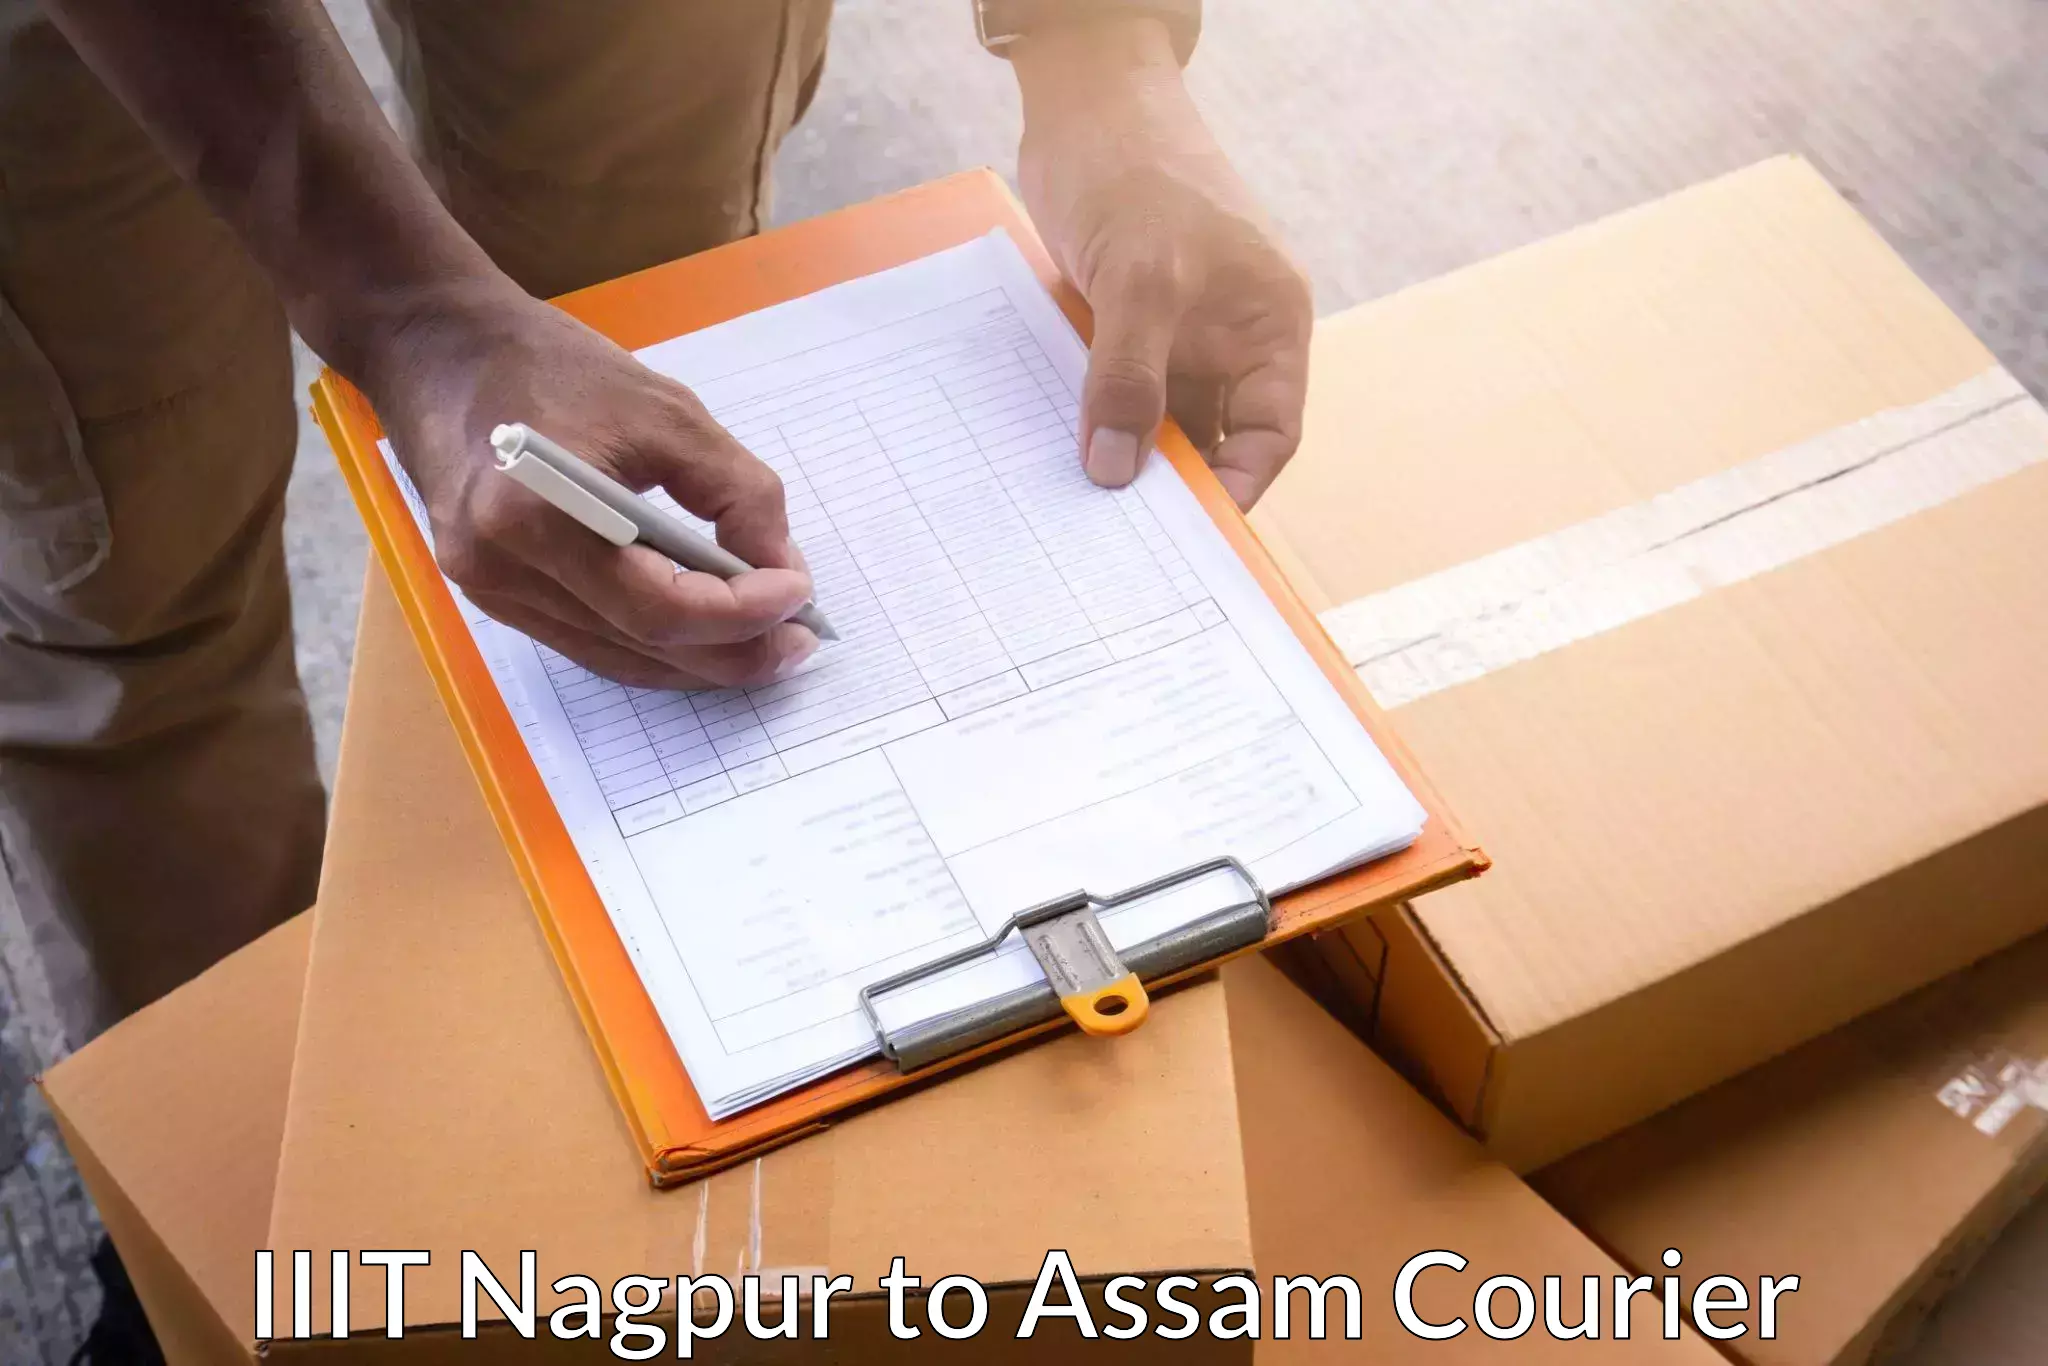 Courier tracking online IIIT Nagpur to Tezpur University